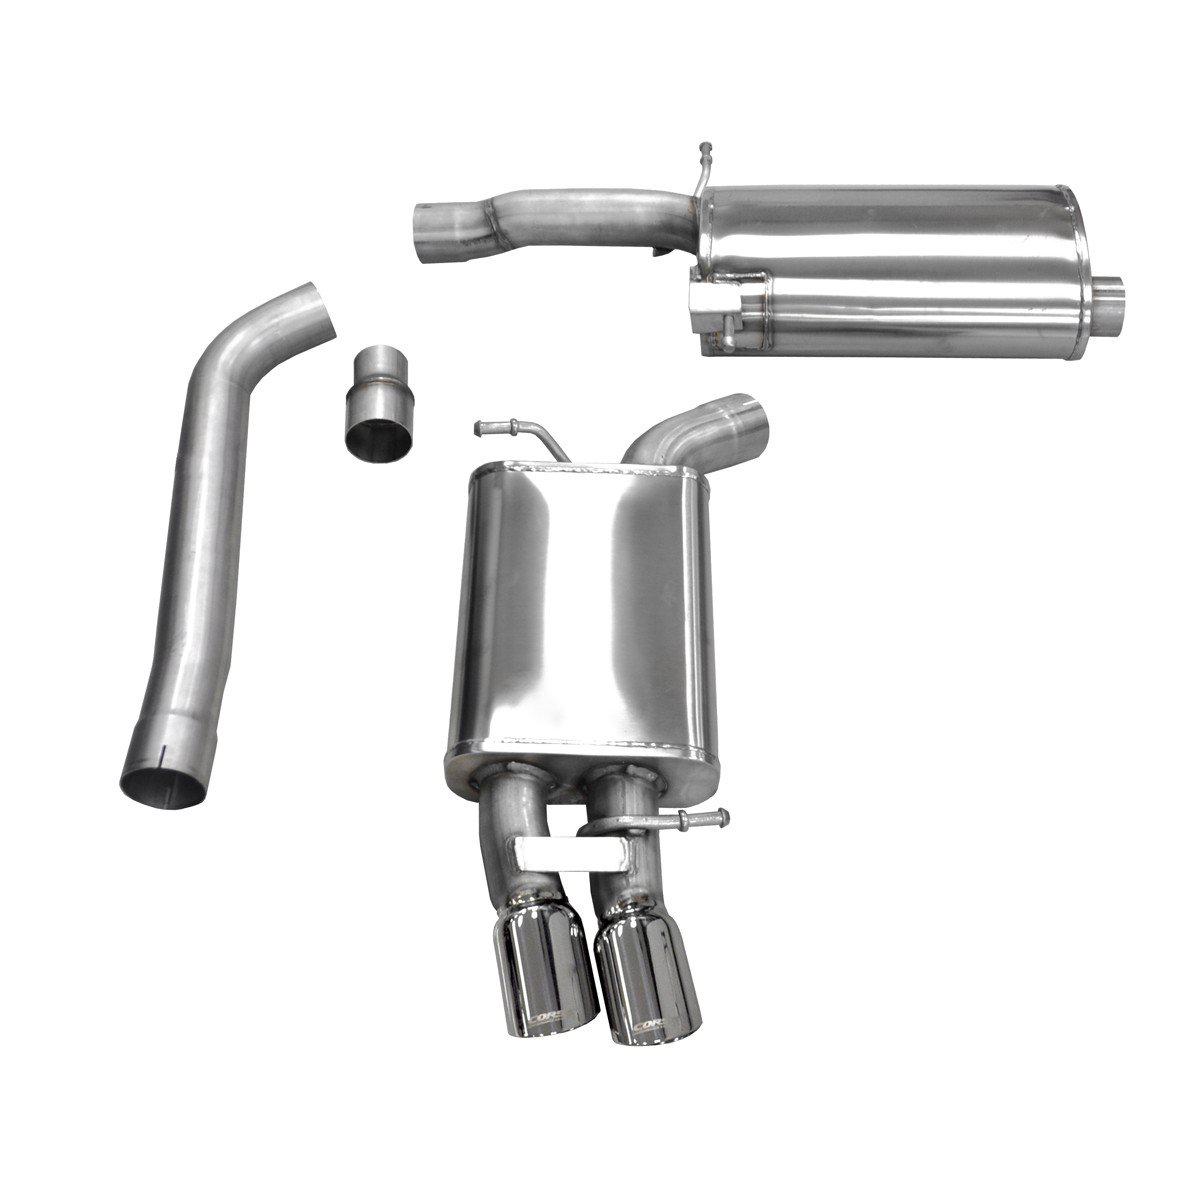 Corsa Performance B8 Audi A4 2.0T Cat-Back Exhaust System-A Little Tuning Co